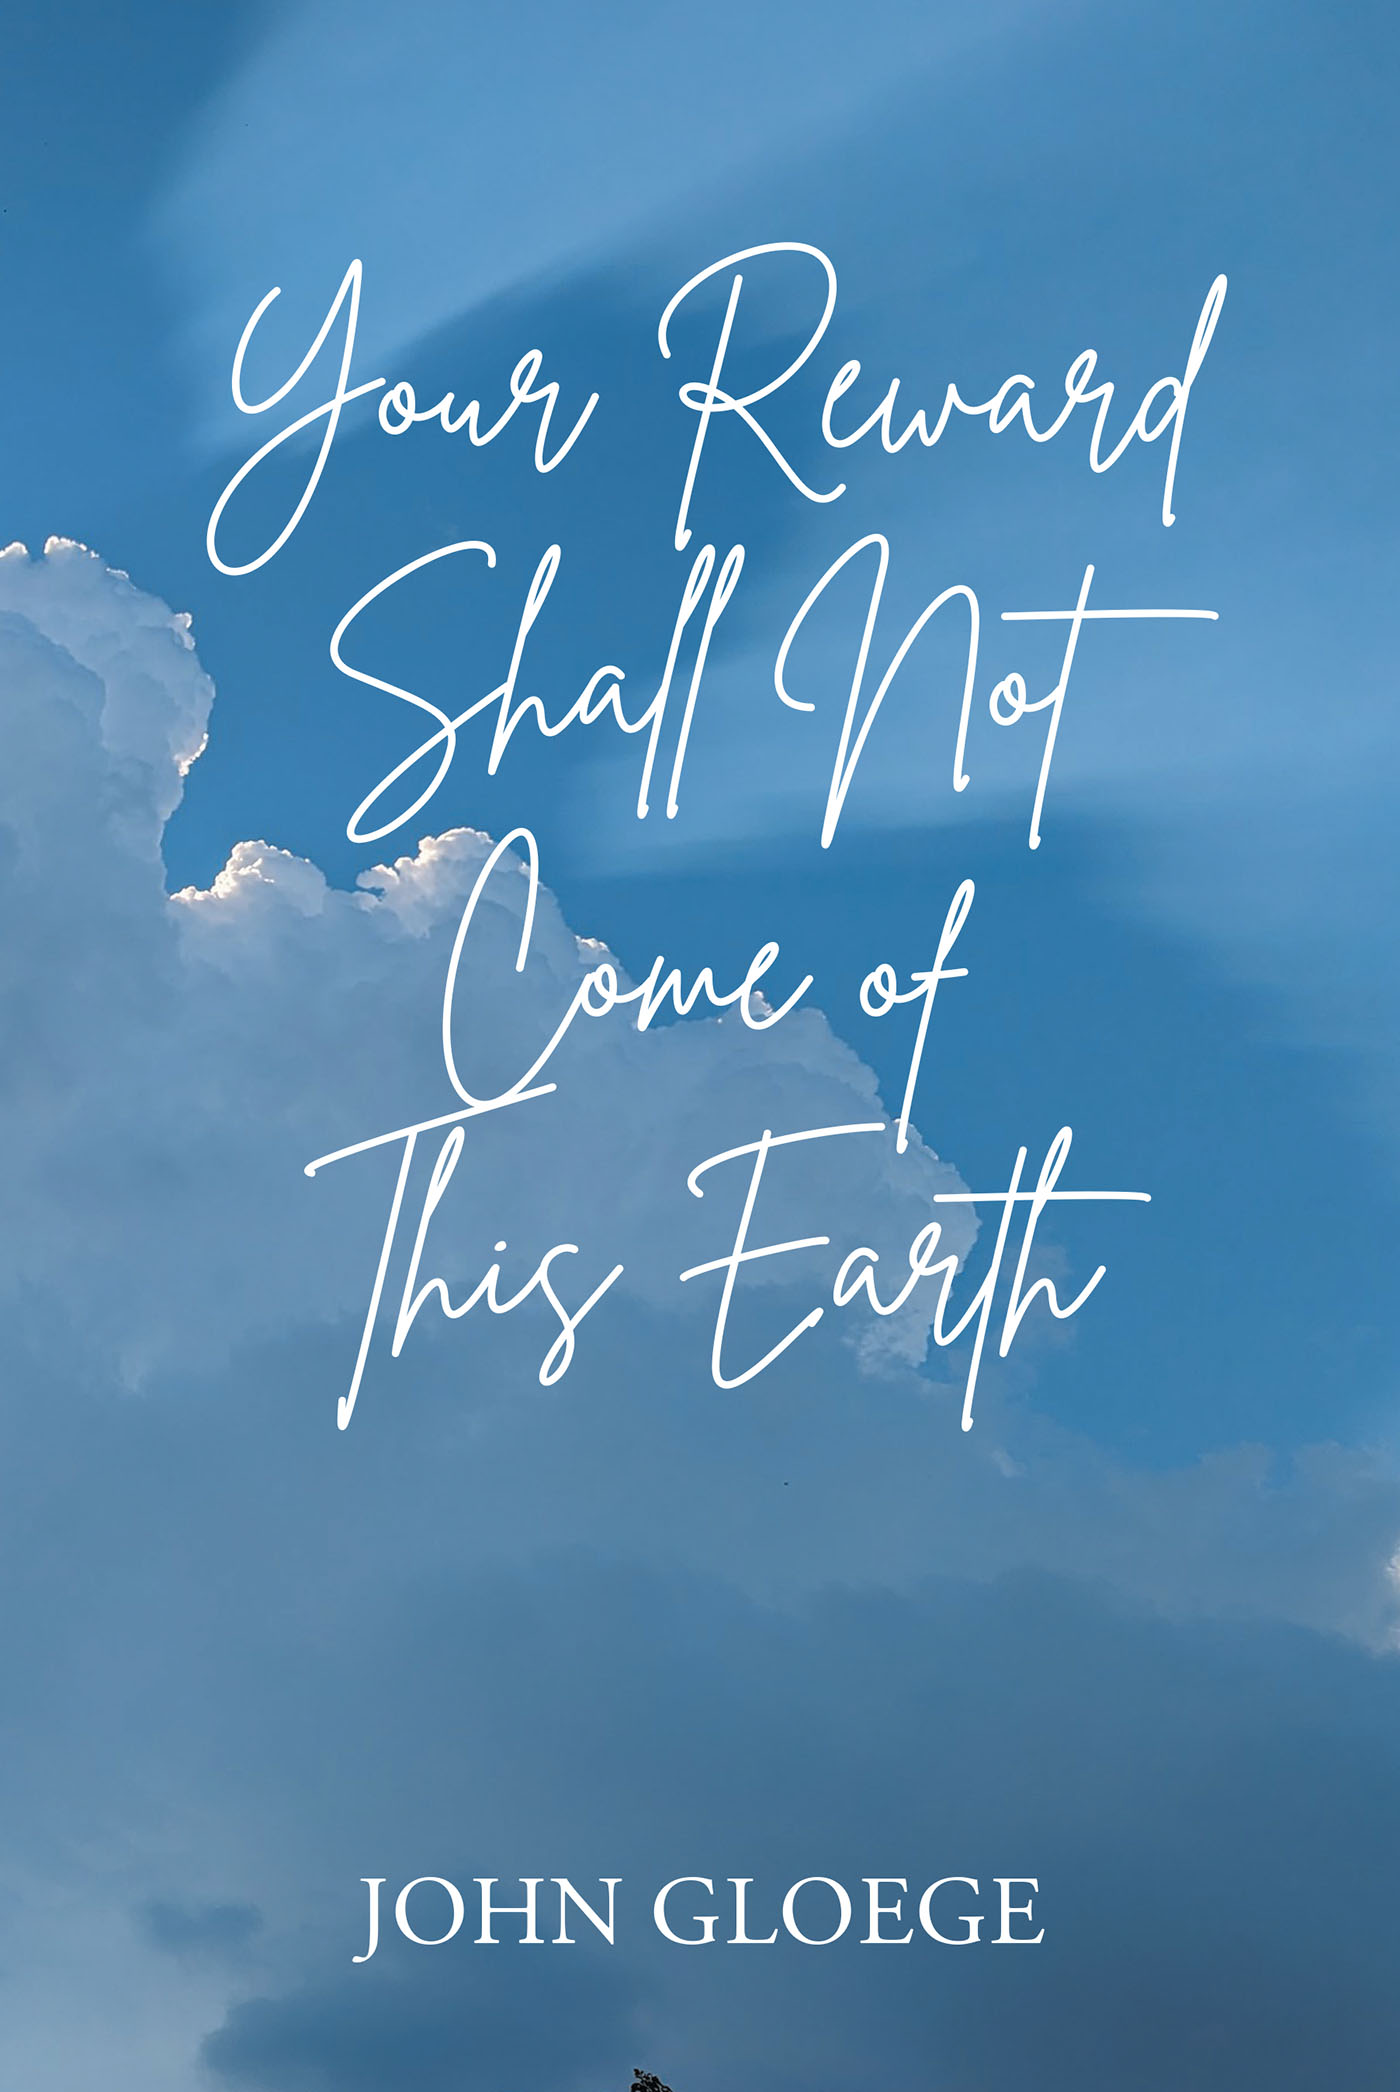 John Gloege’s Newly Released "Your Reward Shall Not Come of This Earth" is an Inspiring Examination of Personal and Spiritual Growth